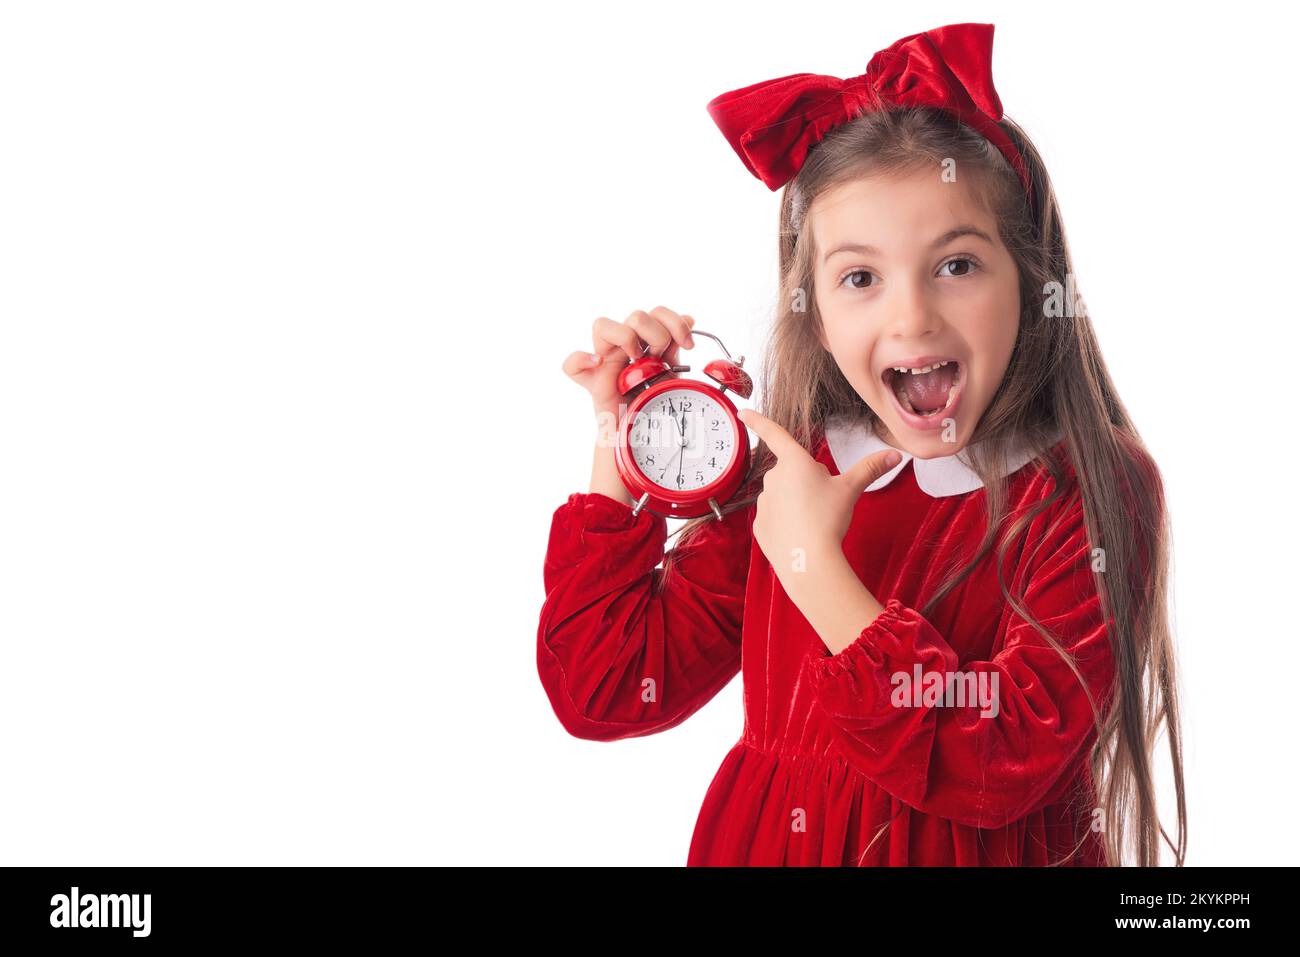 Christmas woman in Santa Claus dress posing with red alarm clock, midnight time for holidays presents Stock Photo